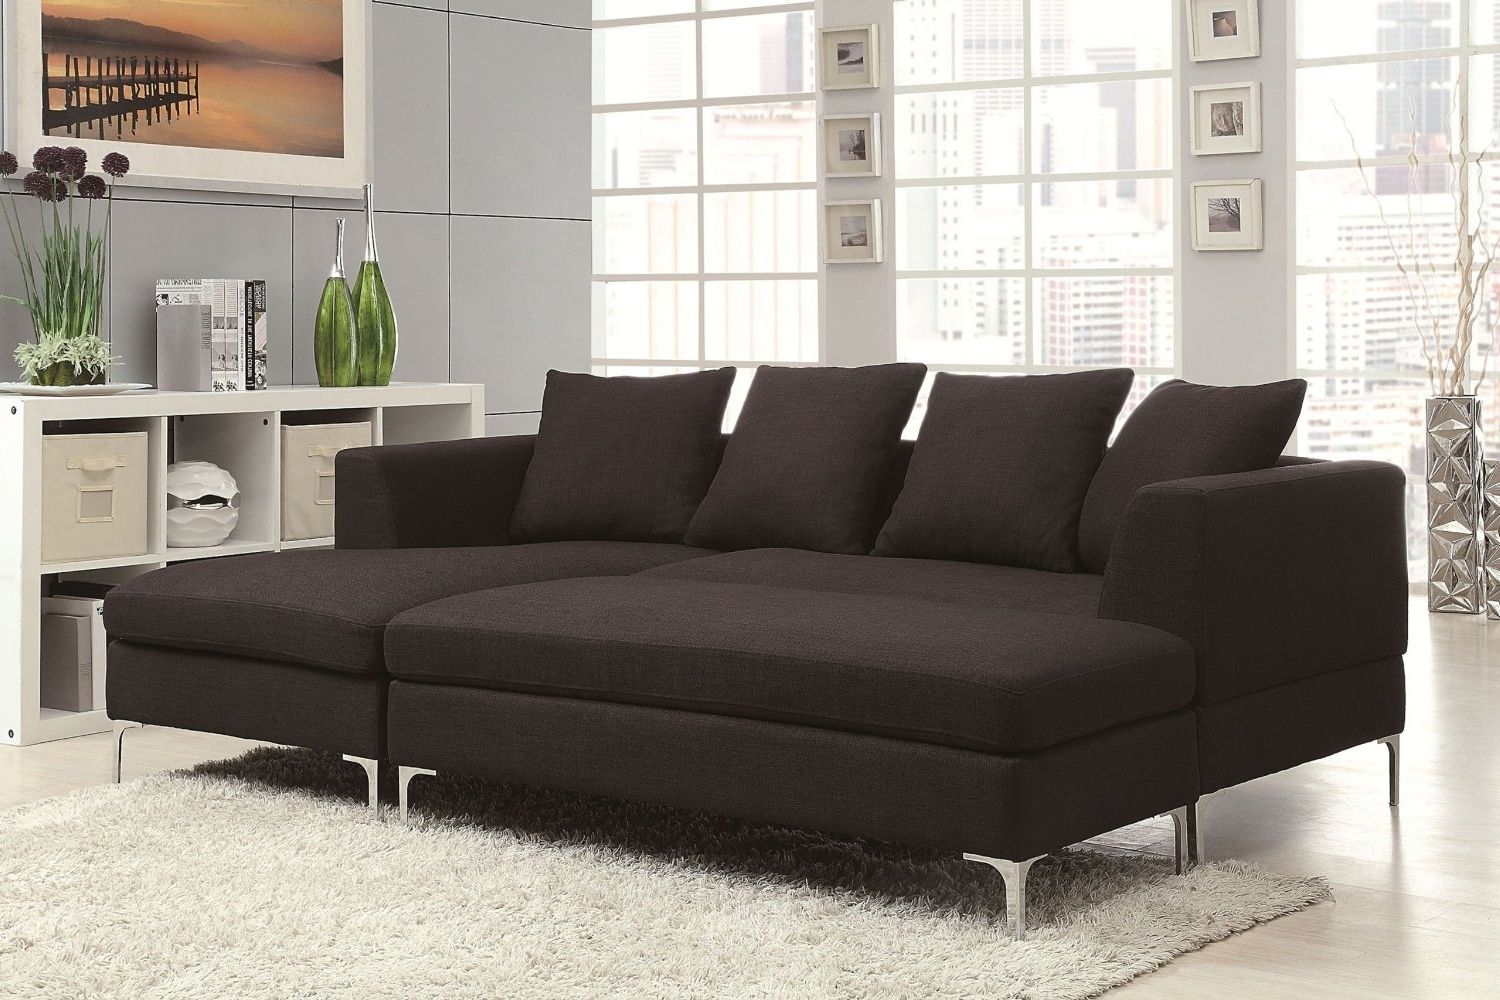 Chaise Sectional Sofas Inside Well Known Sofa : Modular Sofa Reclining Sectional With Chaise Small (View 9 of 15)